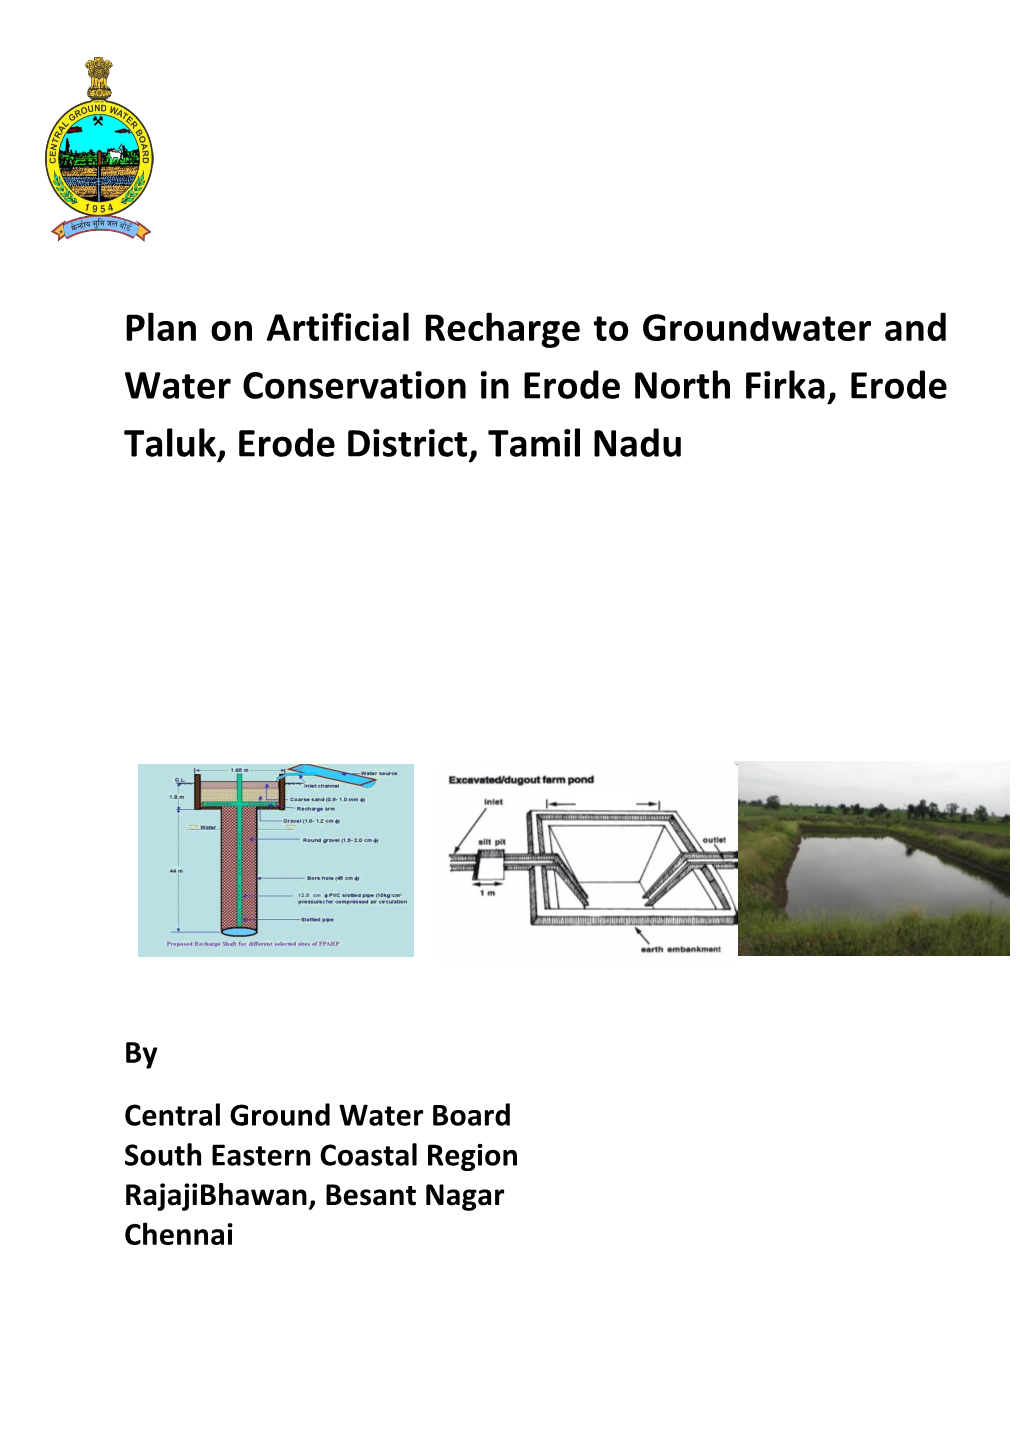 Plan on Artificial Recharge to Groundwater and Water Conservation in Erode North Firka, Erode Taluk, Erode District, Tamil Nadu